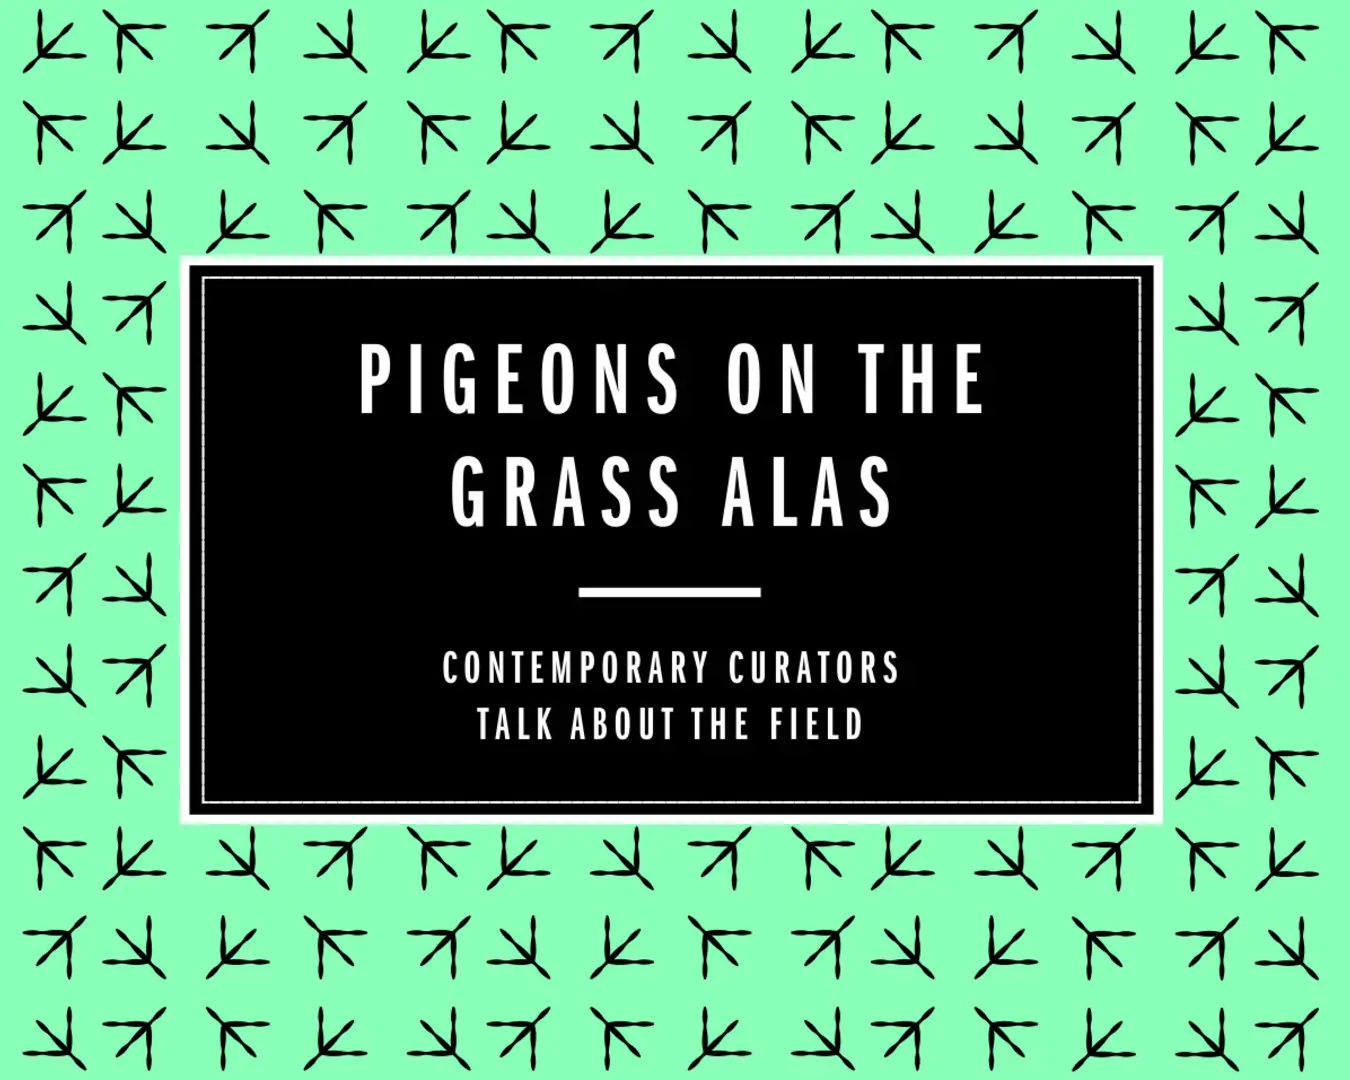 Cover of Pigeons on the Grass, Alas: Contemporary Curators Talk about the Field, published by The Pew Center for Arts &amp; Heritage in 2013.